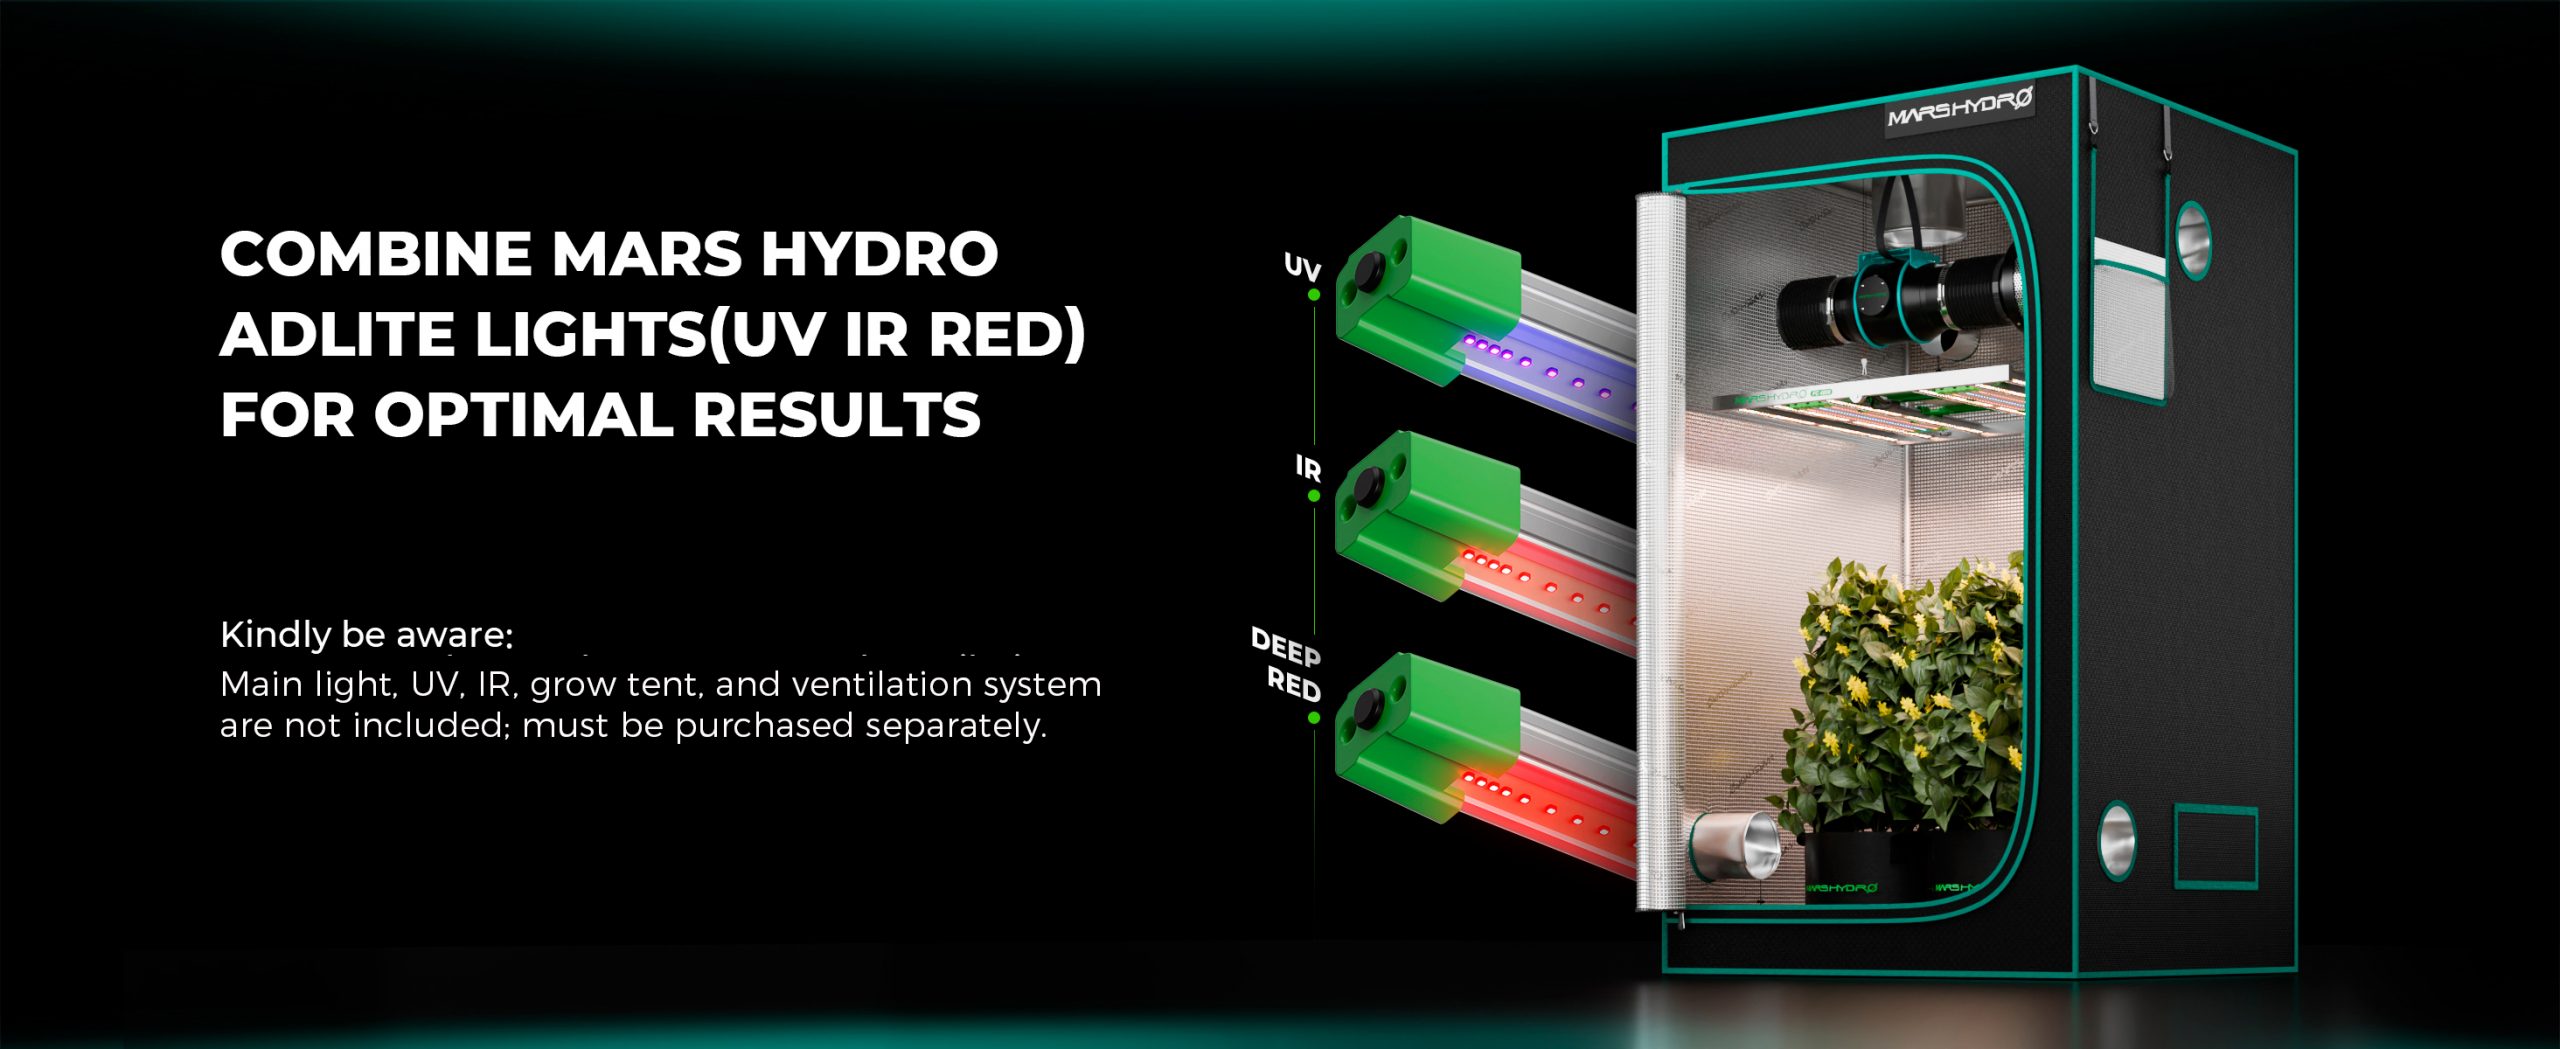 For-RED55-Combine-Mars-Hydro-Adlite-lights-uv-ir-deep-red-for-optimal-results